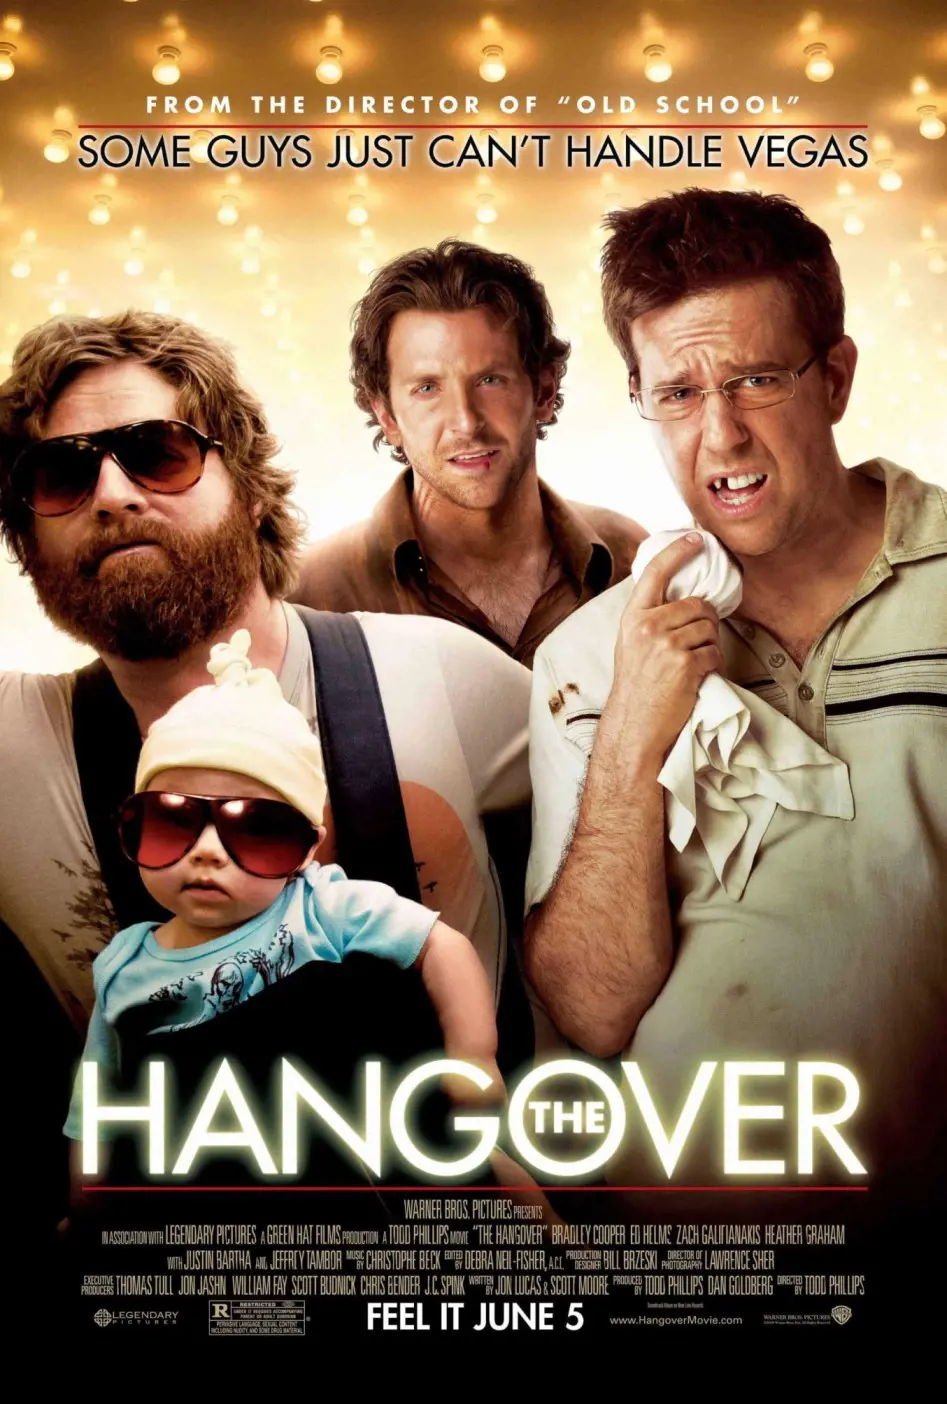 The Hangover grossed box office collection of $469.3 million